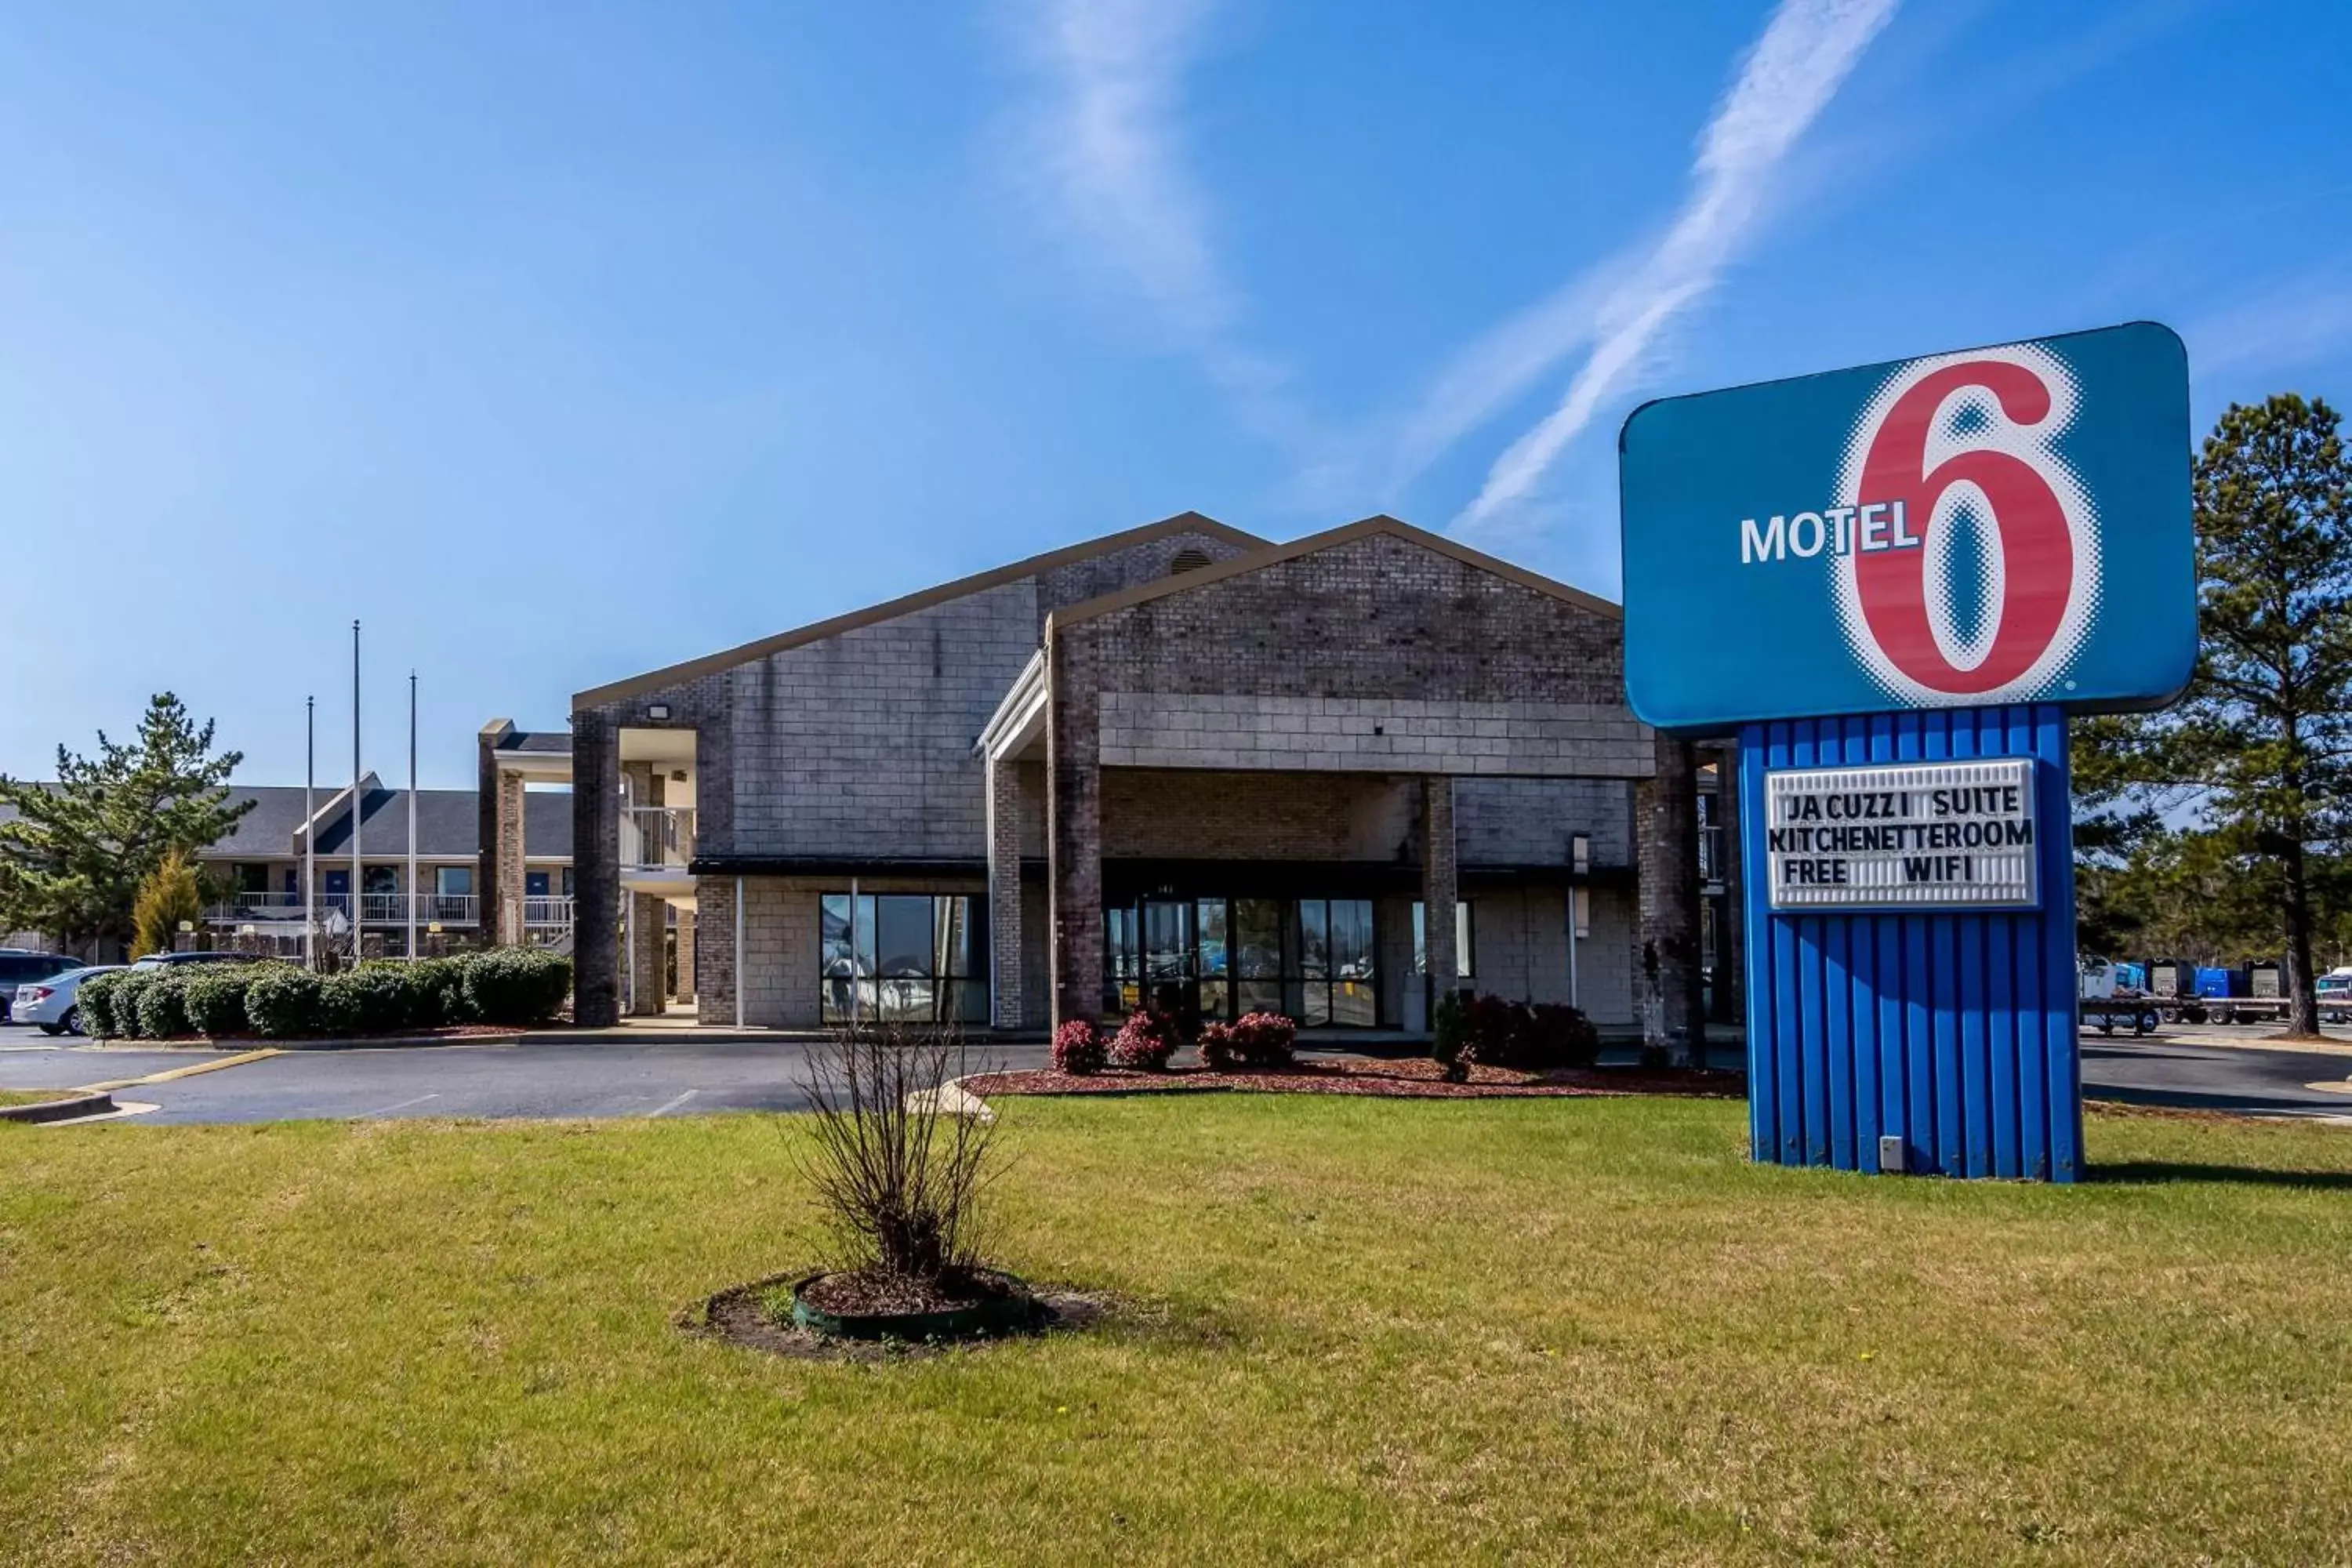 Property building in Motel 6-Kenly, NC